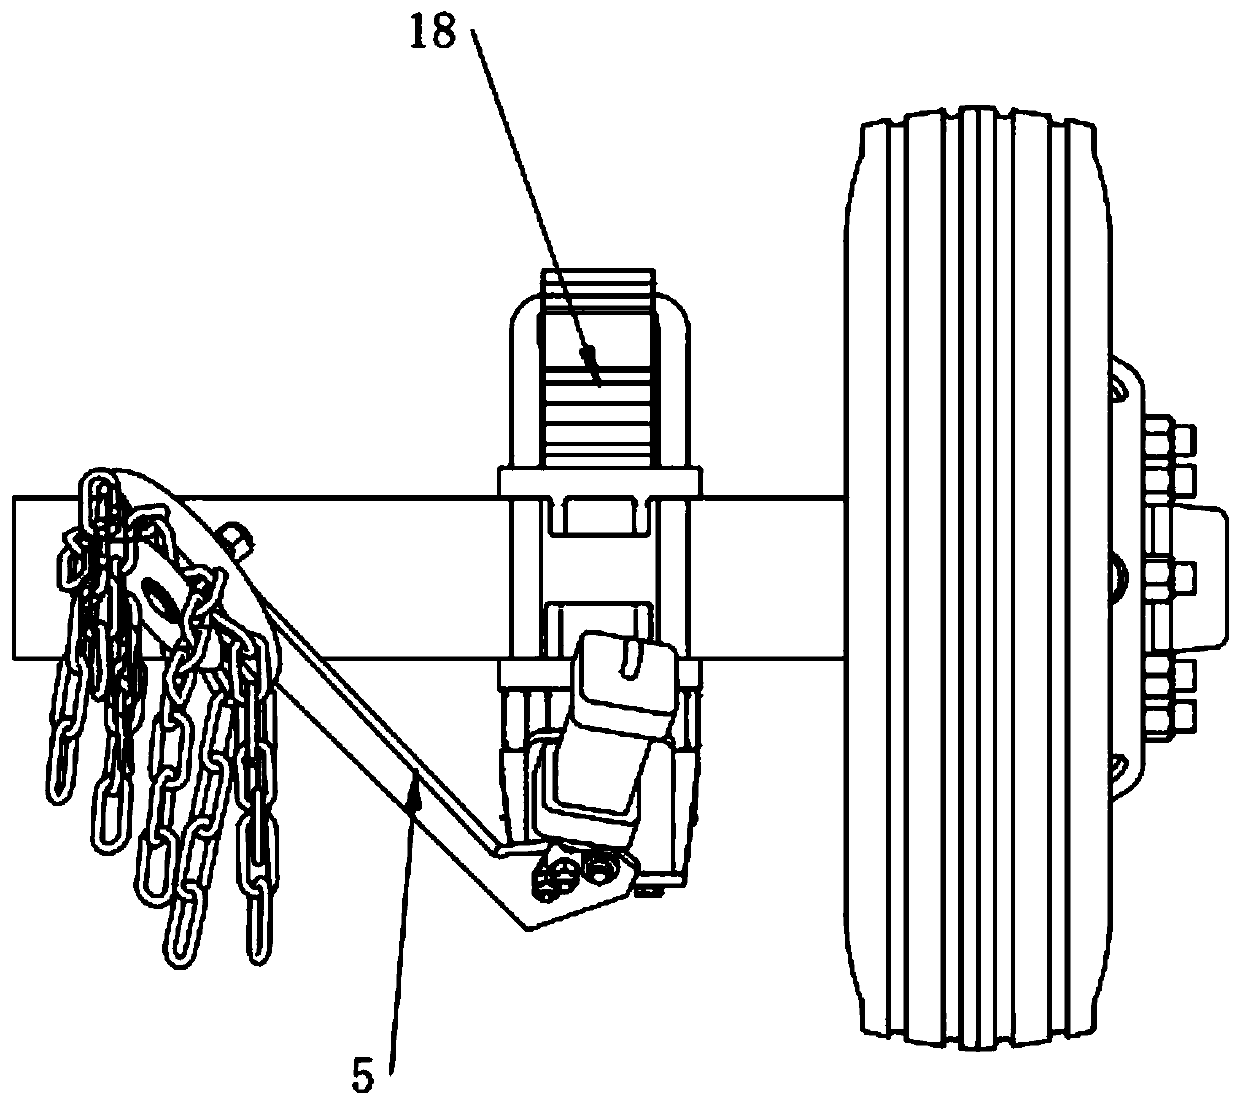 Antiskid method and device for automobile tires